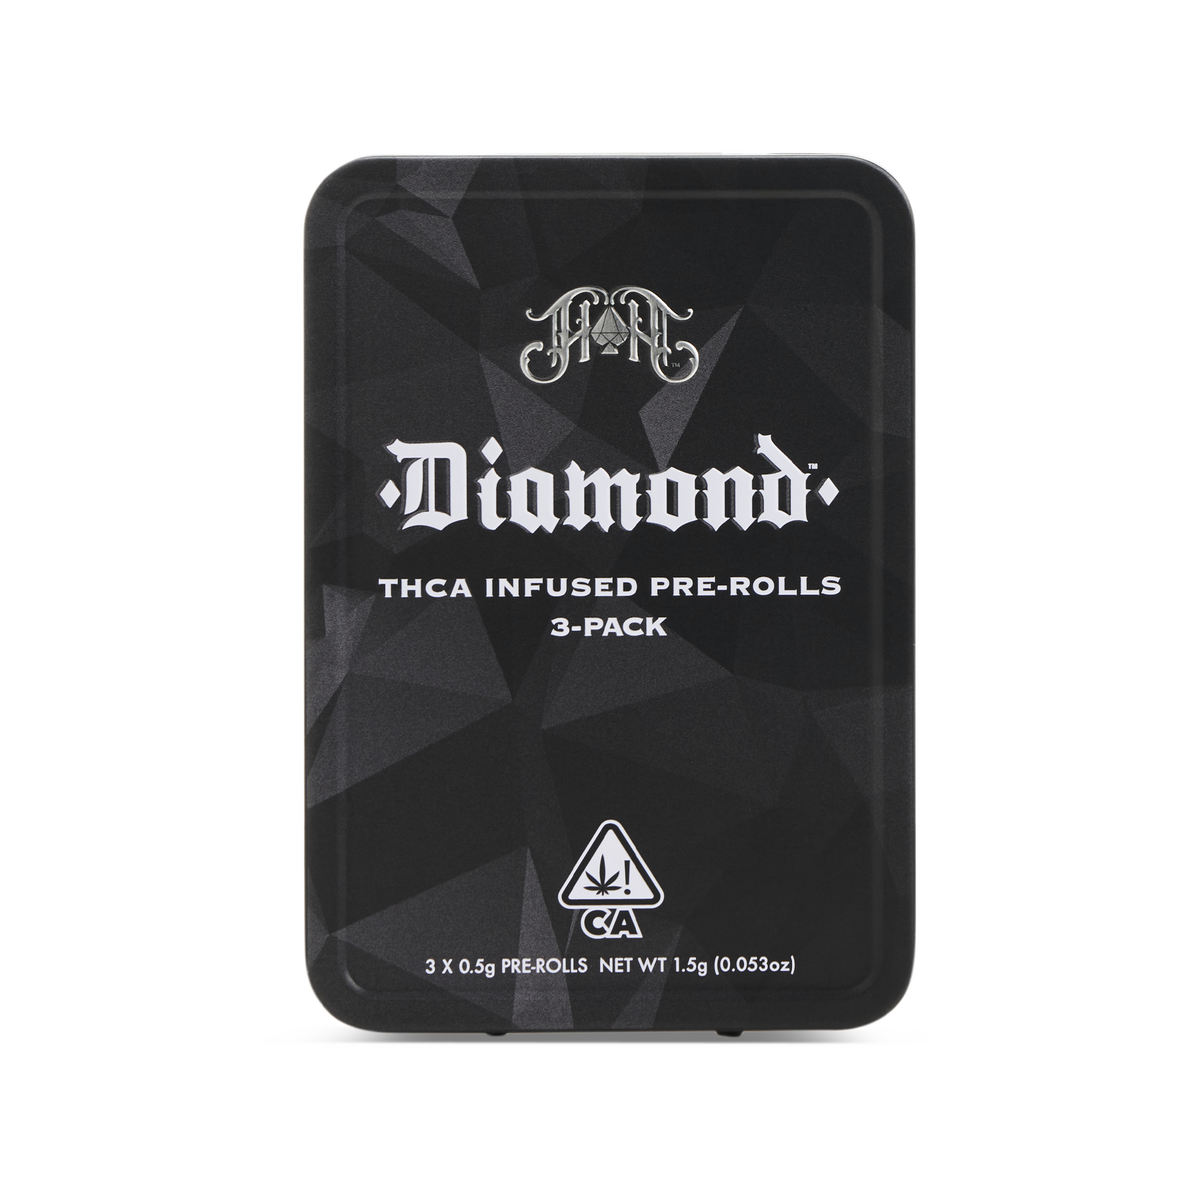 Private Reserve | Indica - Diamond THCA-Infused Pre-Rolls - 1.5G Three-Pack